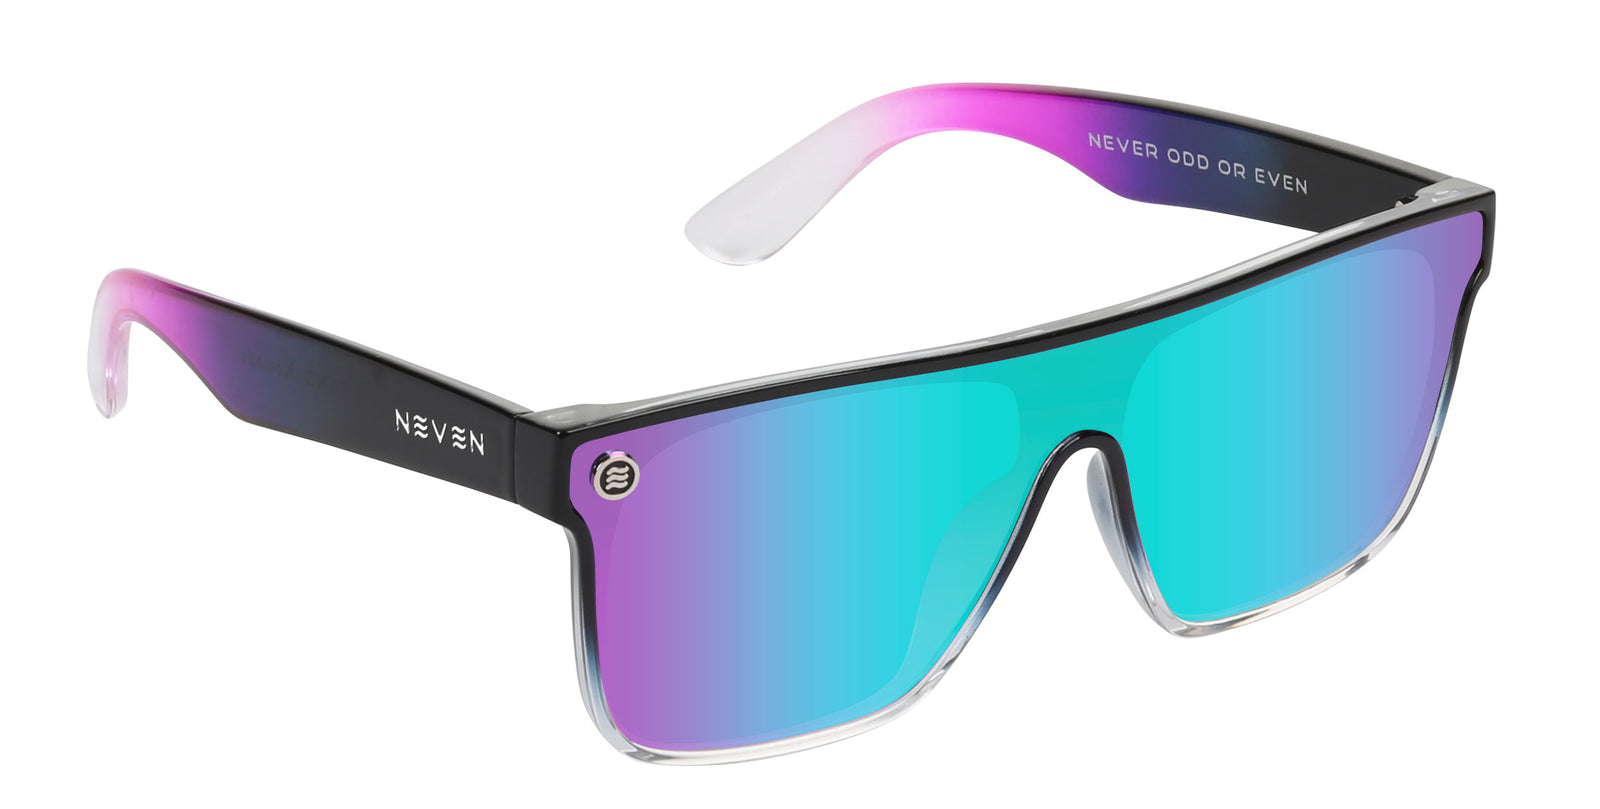 New shades for work from @neveneyewearofficial came pretty fast